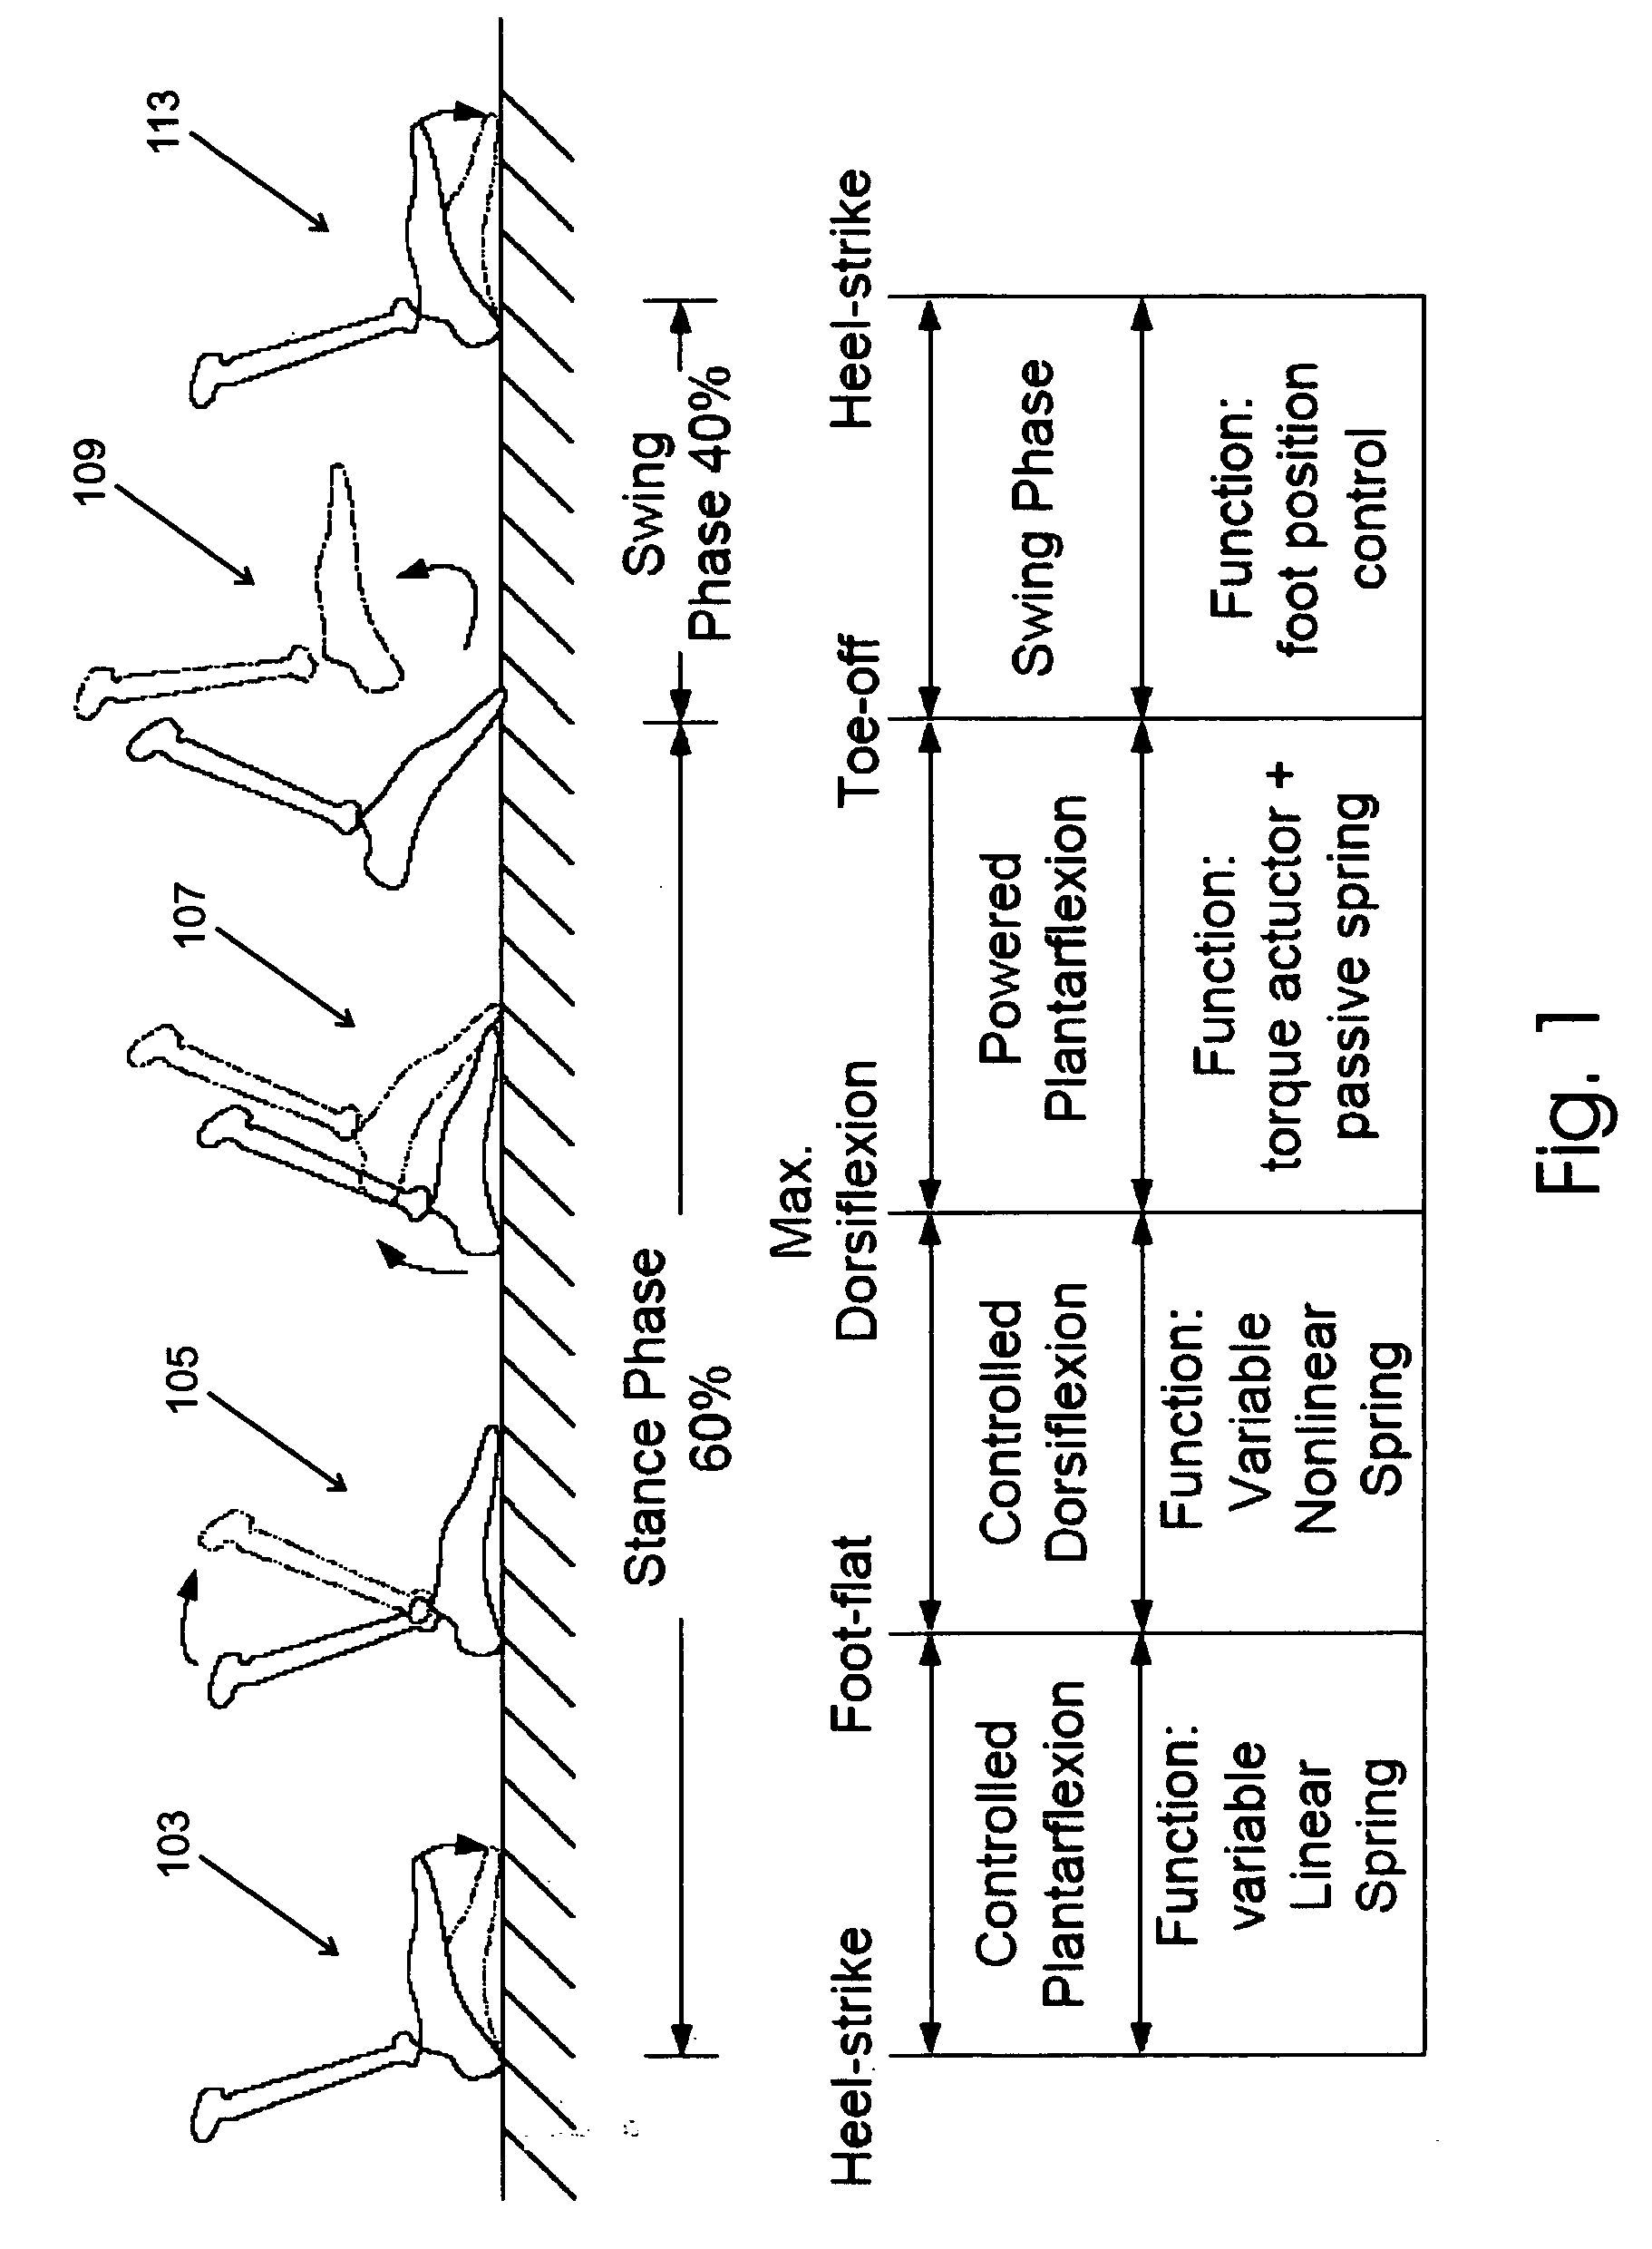 Artificial human limbs and joints employing actuators, springs, and variable-damper elements